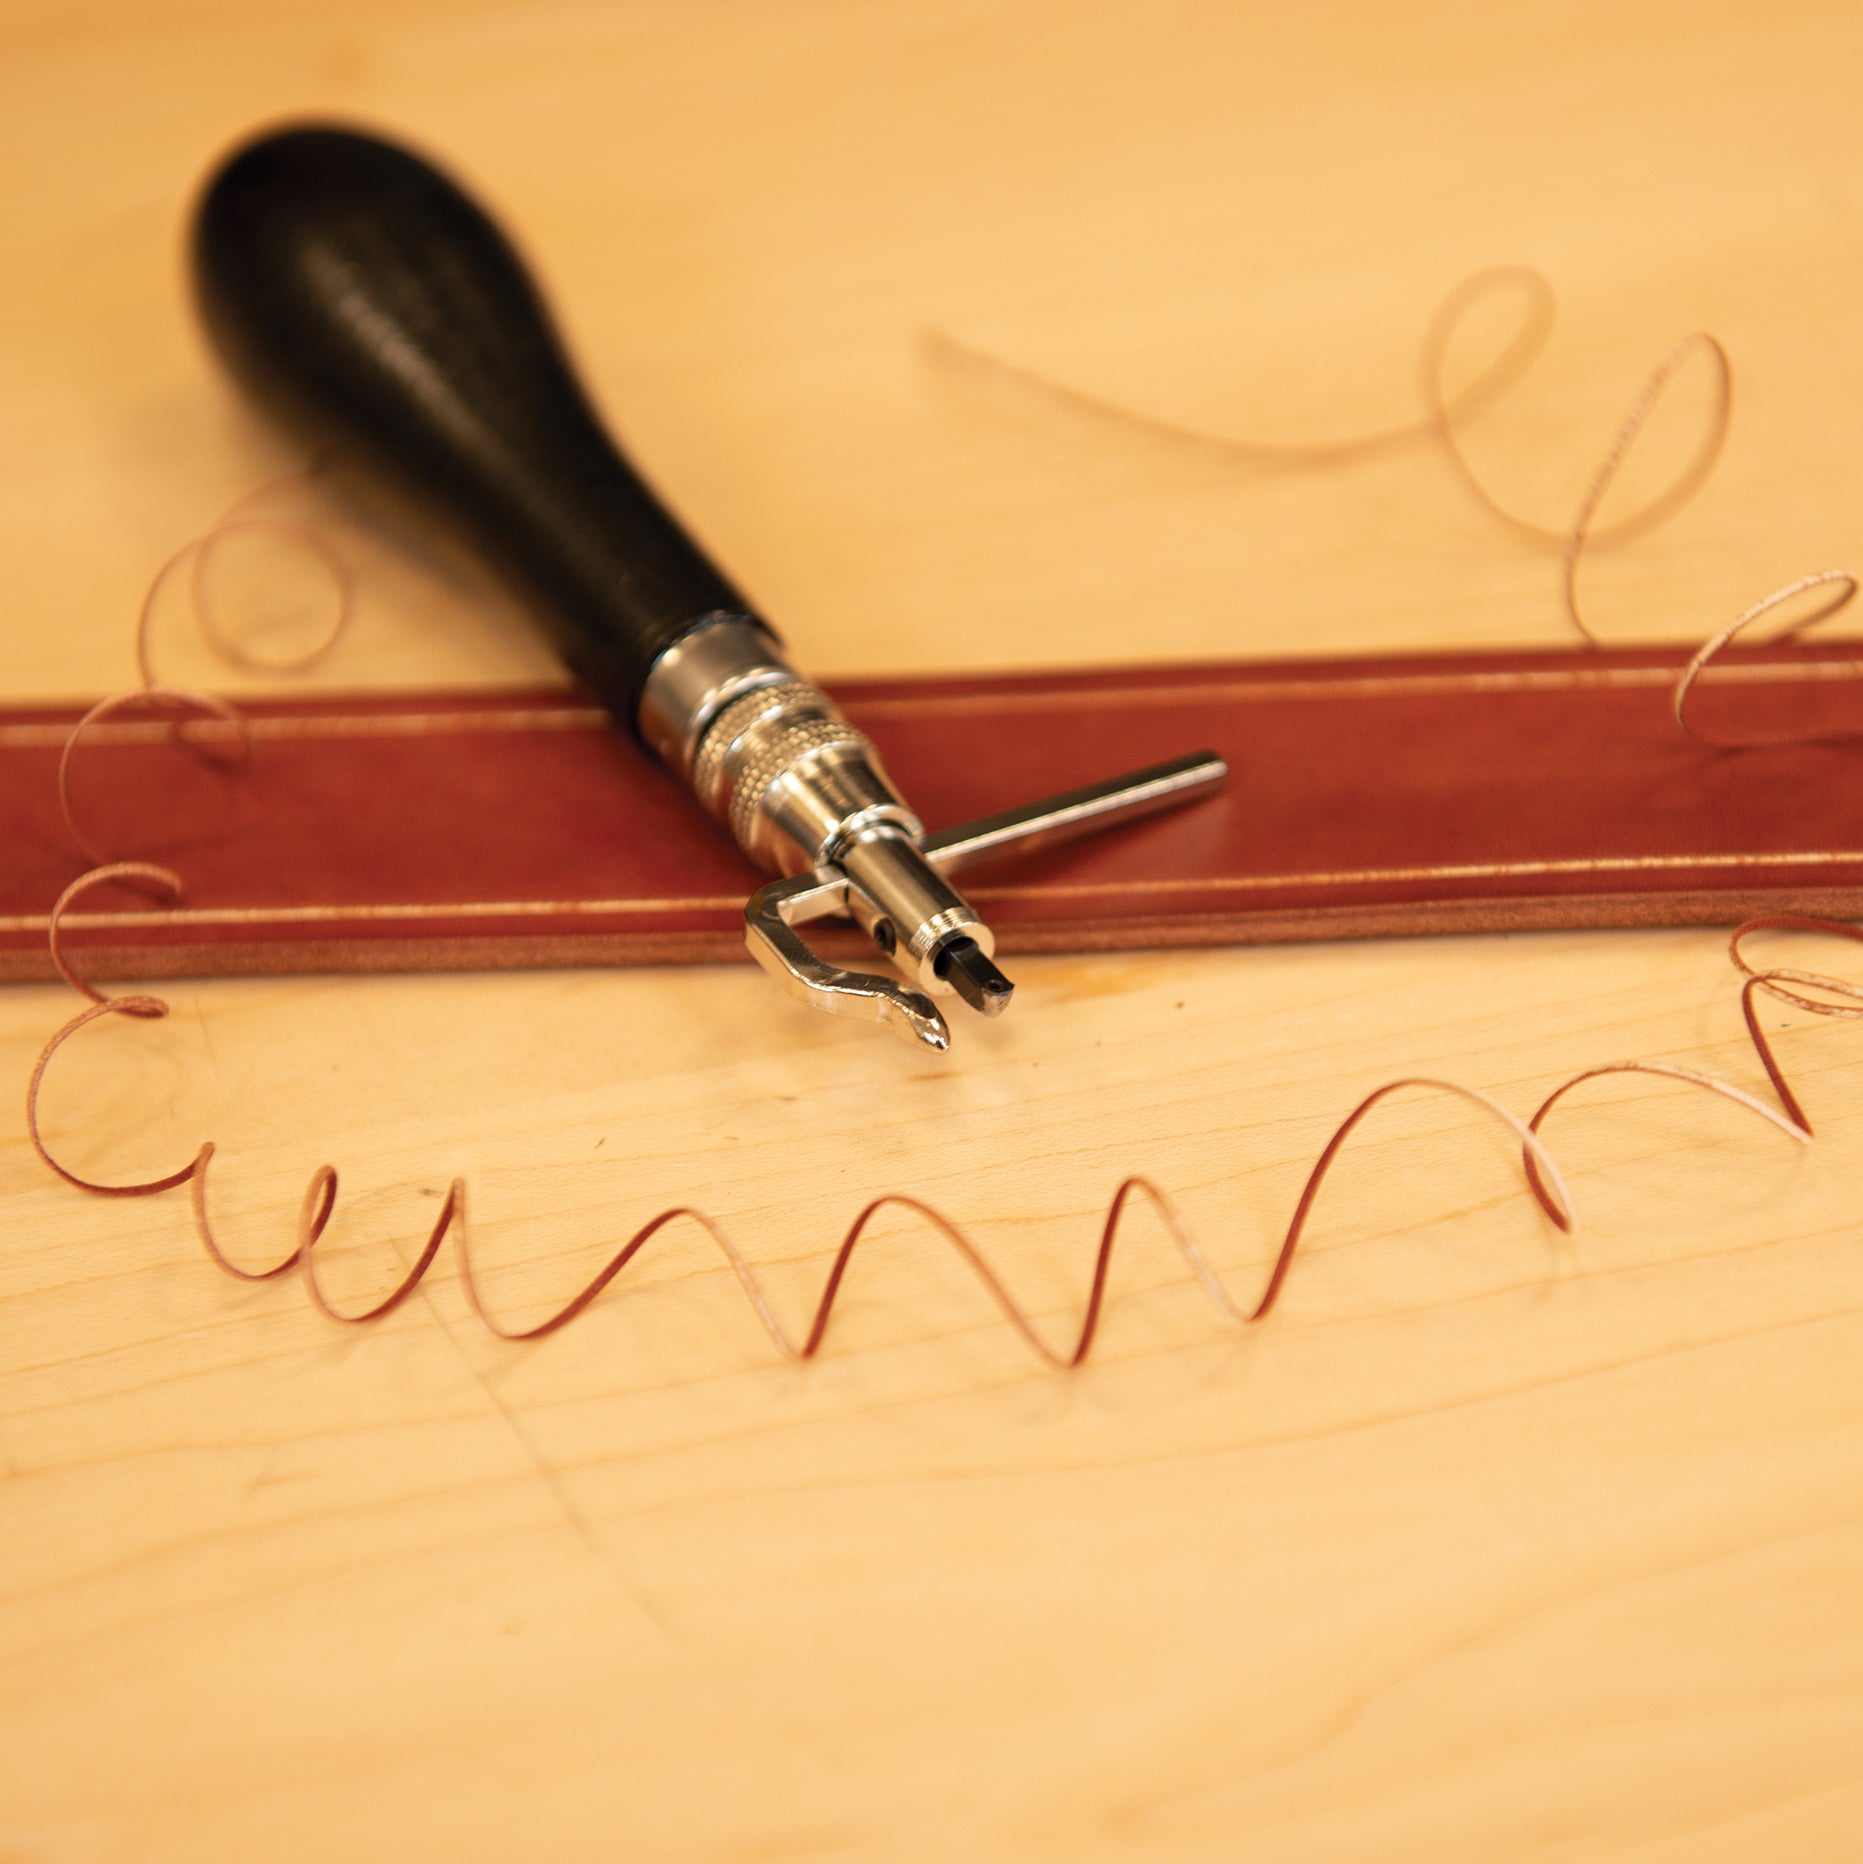 The Ultimate Guide to Sewing Leather by Hand